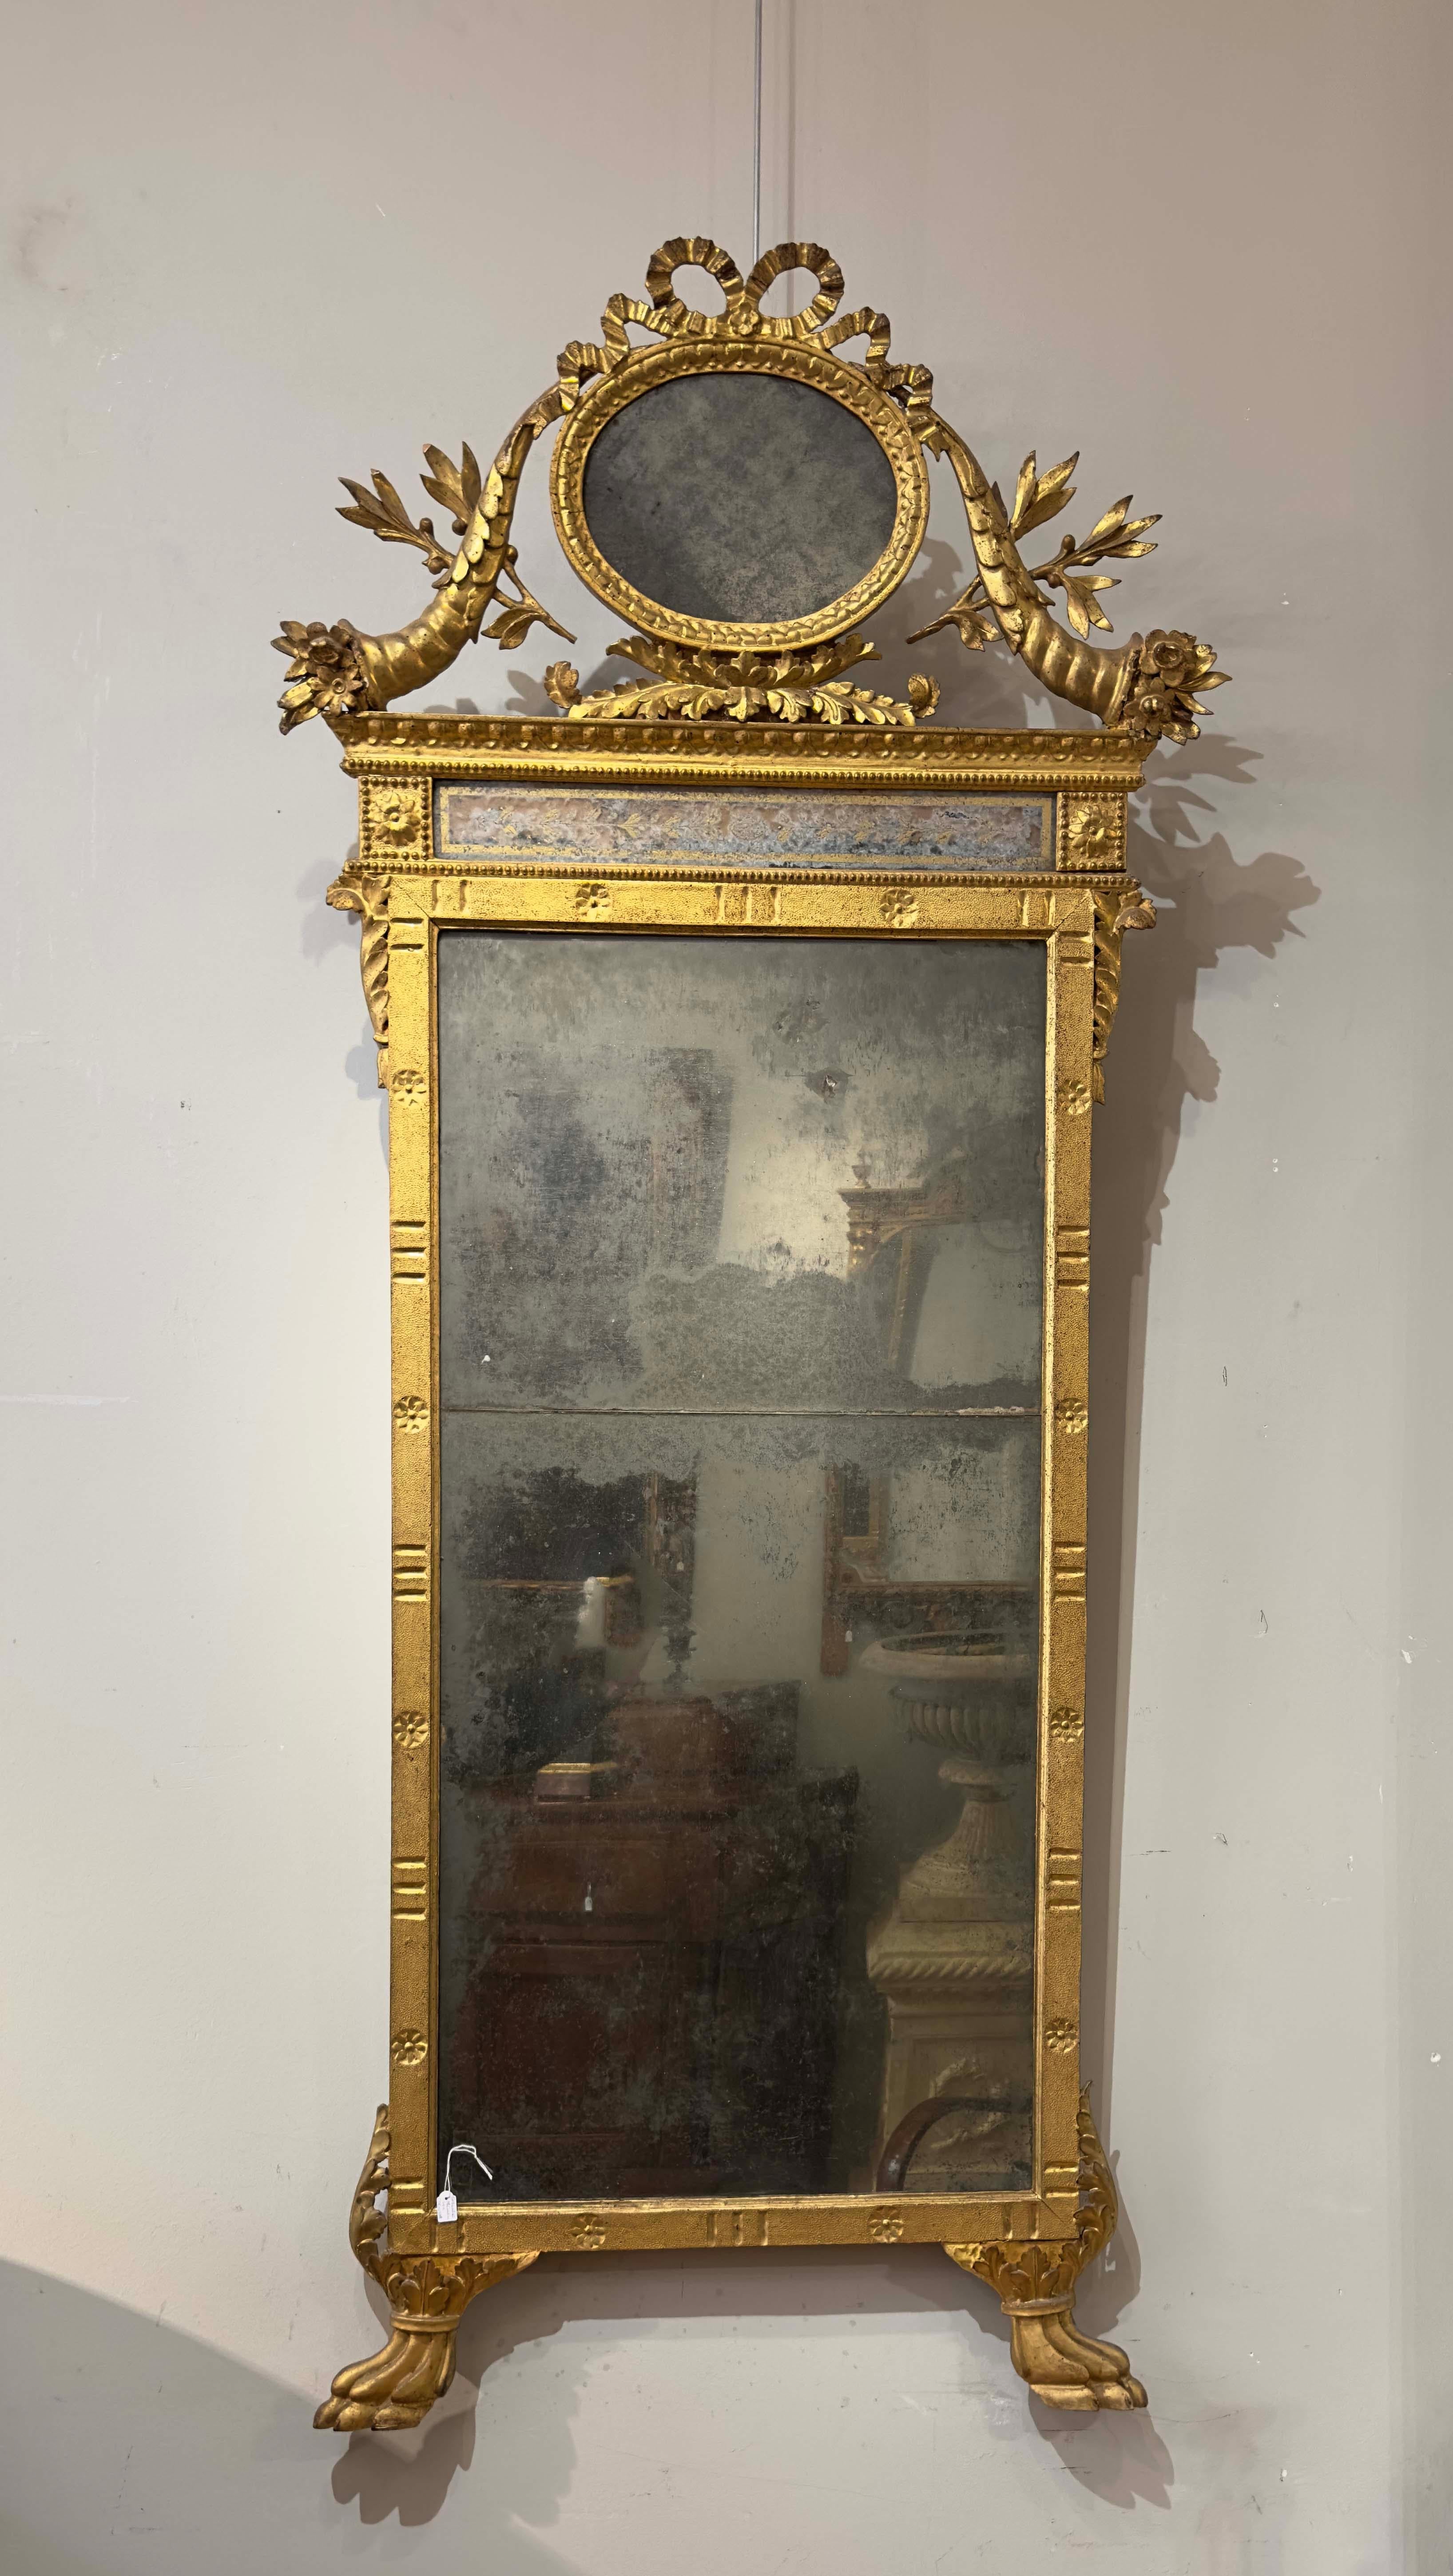 END OF THE 18th CENTURY NEOCLASSICAL MIRROR WITH CORNUCOPIAS AND OLIVE BRANCHES  For Sale 5